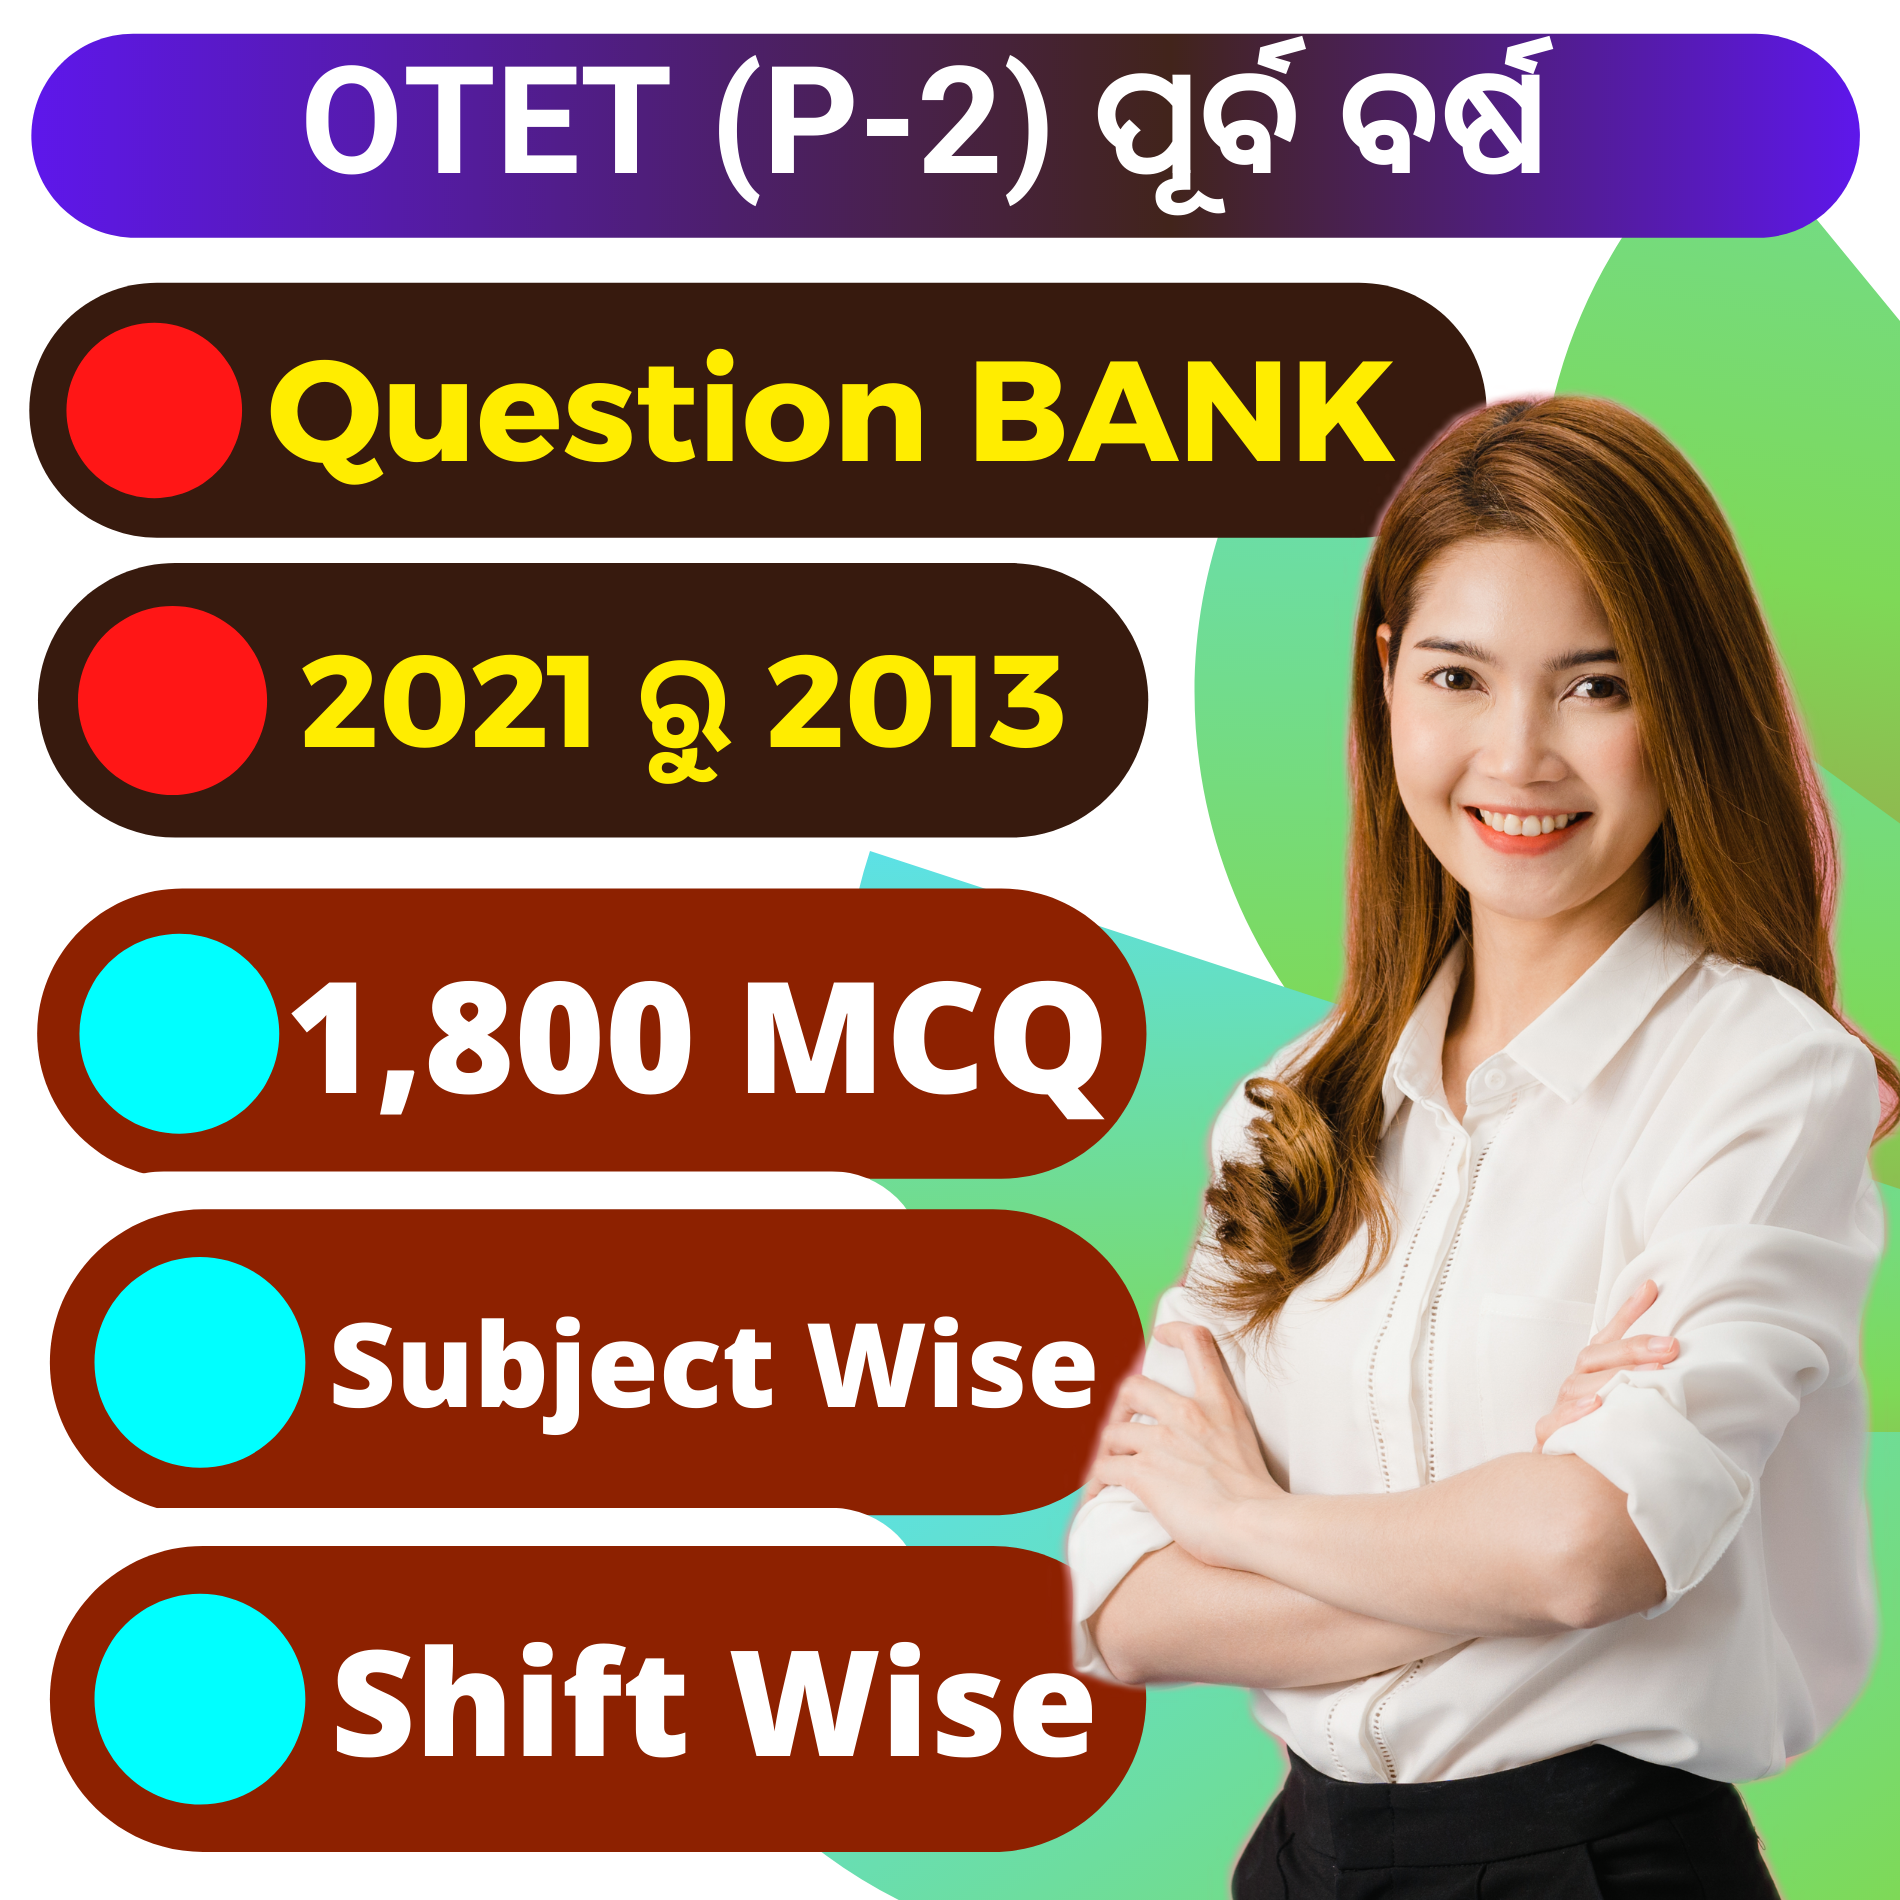 C- OTET P-2 EXAM QUESTION BANK (SUBJECT WISE & SHIFT WISE PREVIOUS YEAR QUESTIONS & ANSWER 2021 To 2013) 